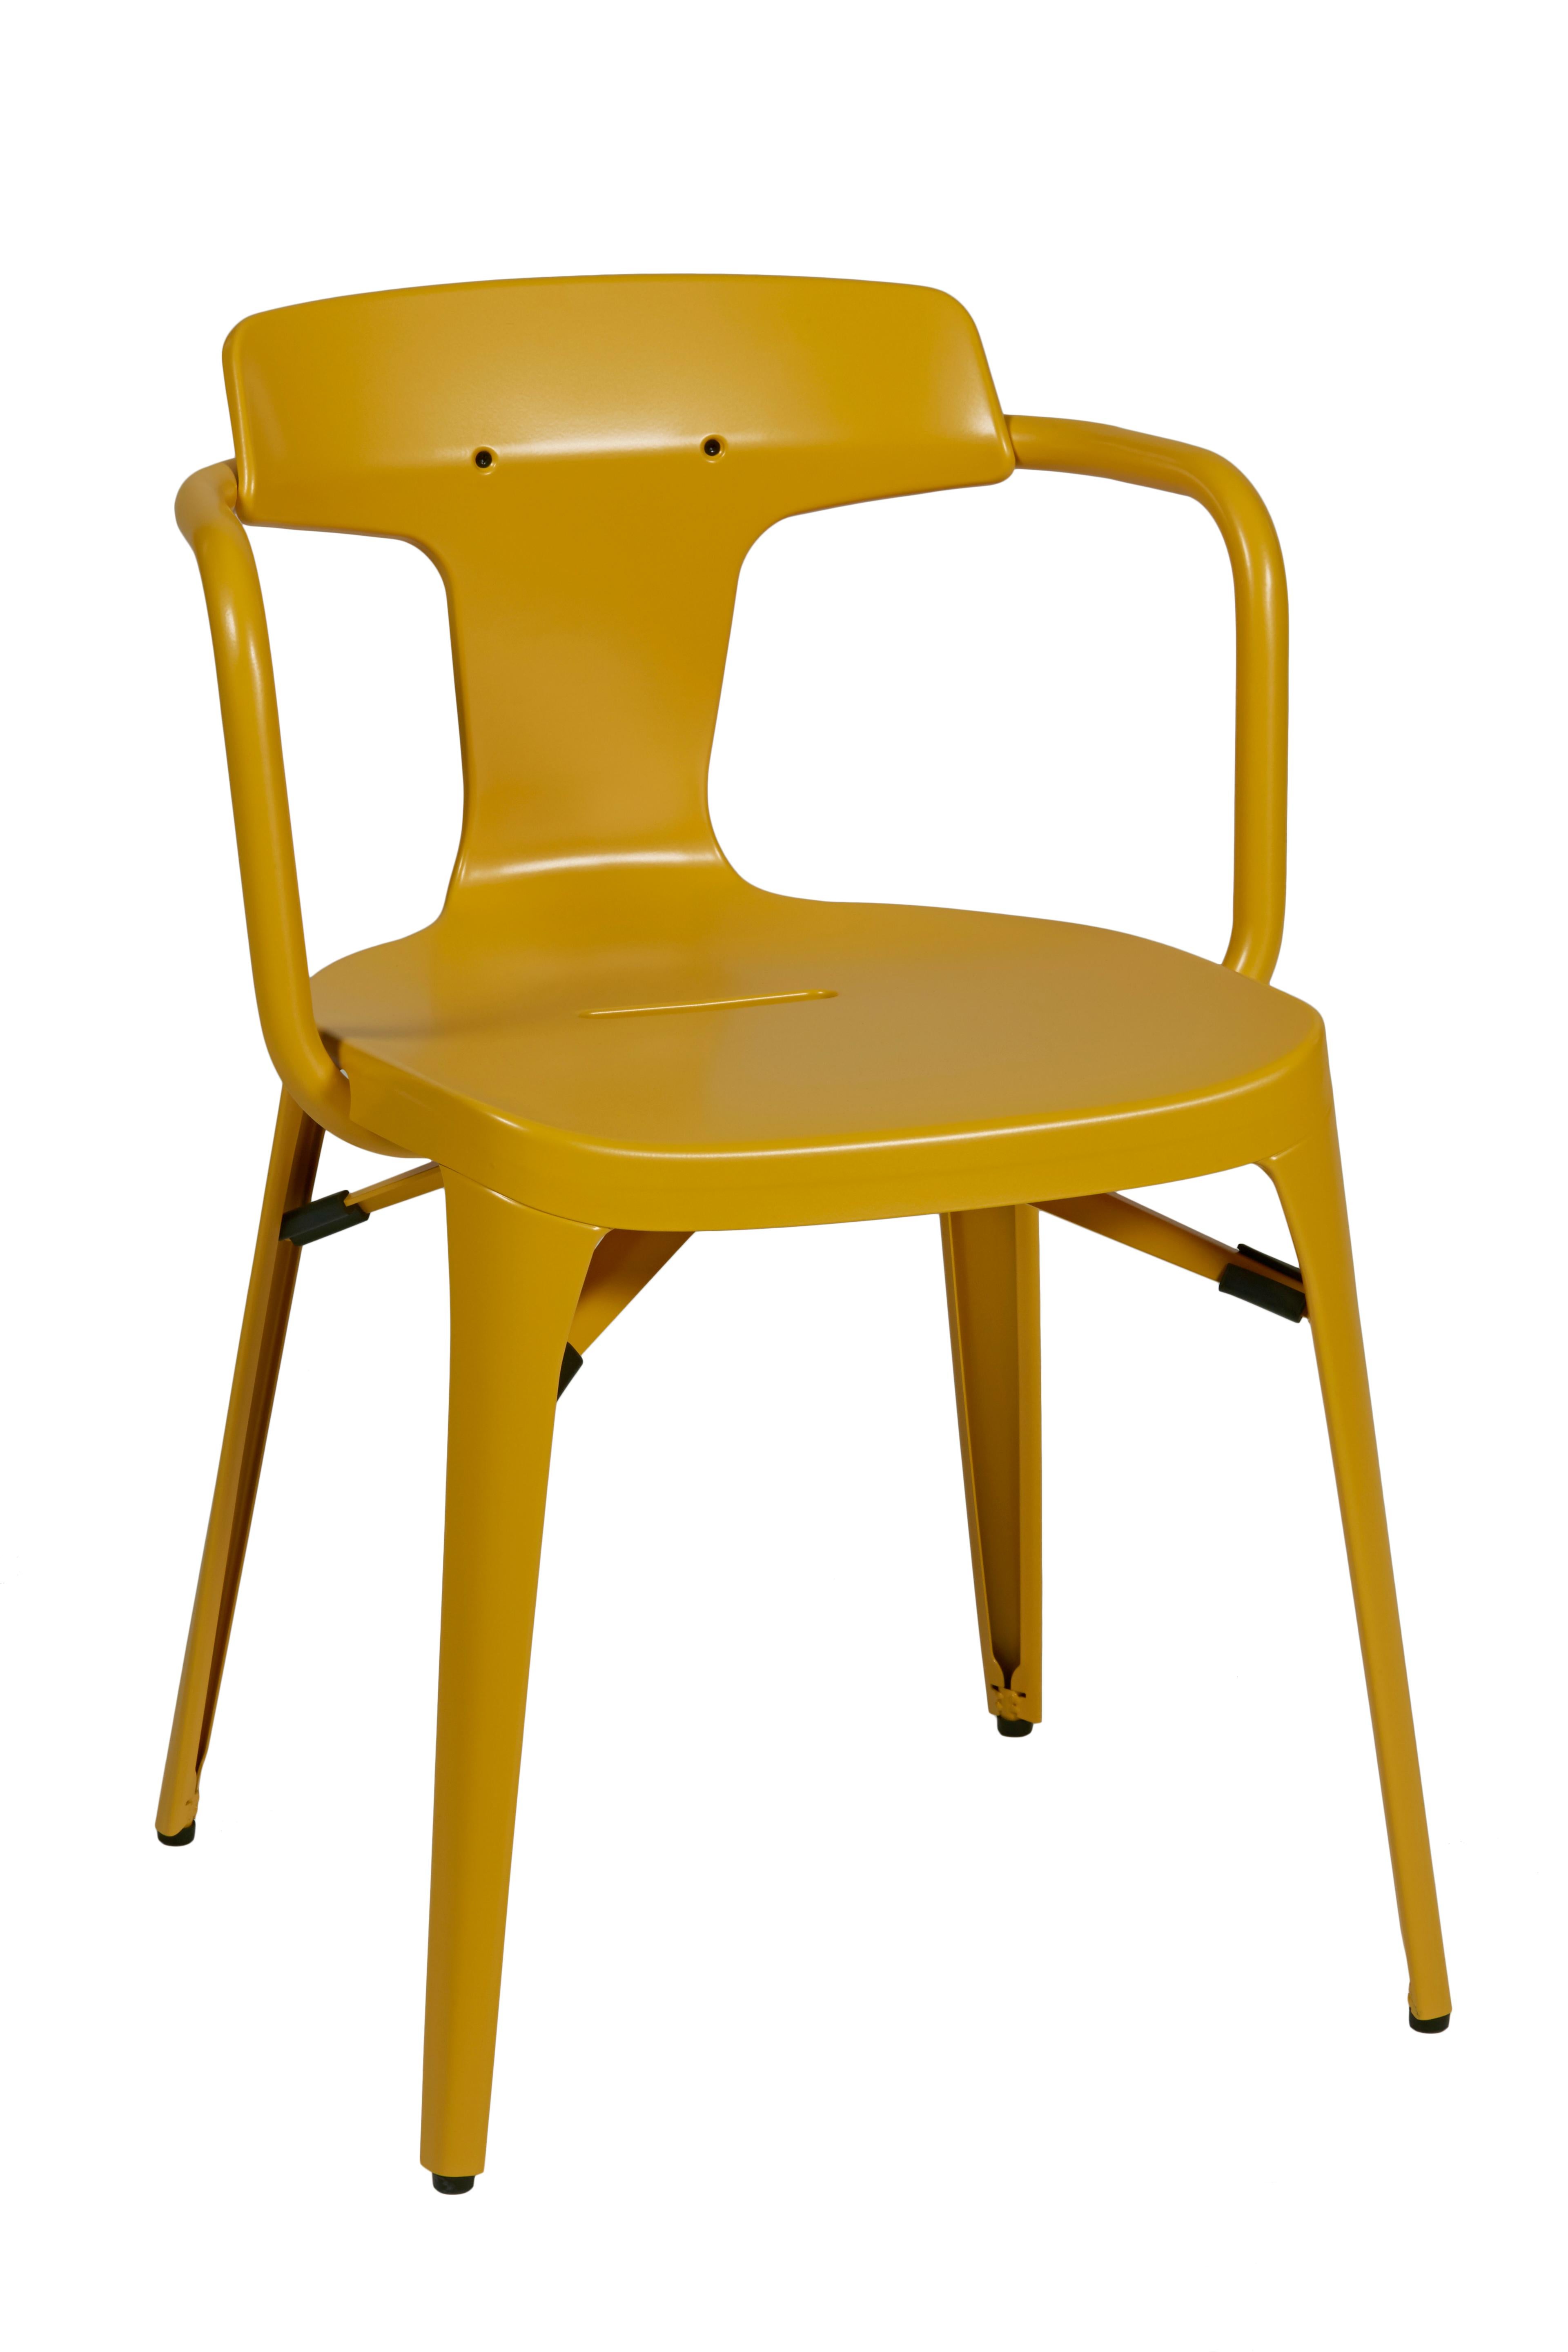 Im Angebot: T14 Chair in Pop Colors by Patrick Norguet and Tolix, Orange (Jaune Moutarde) 3